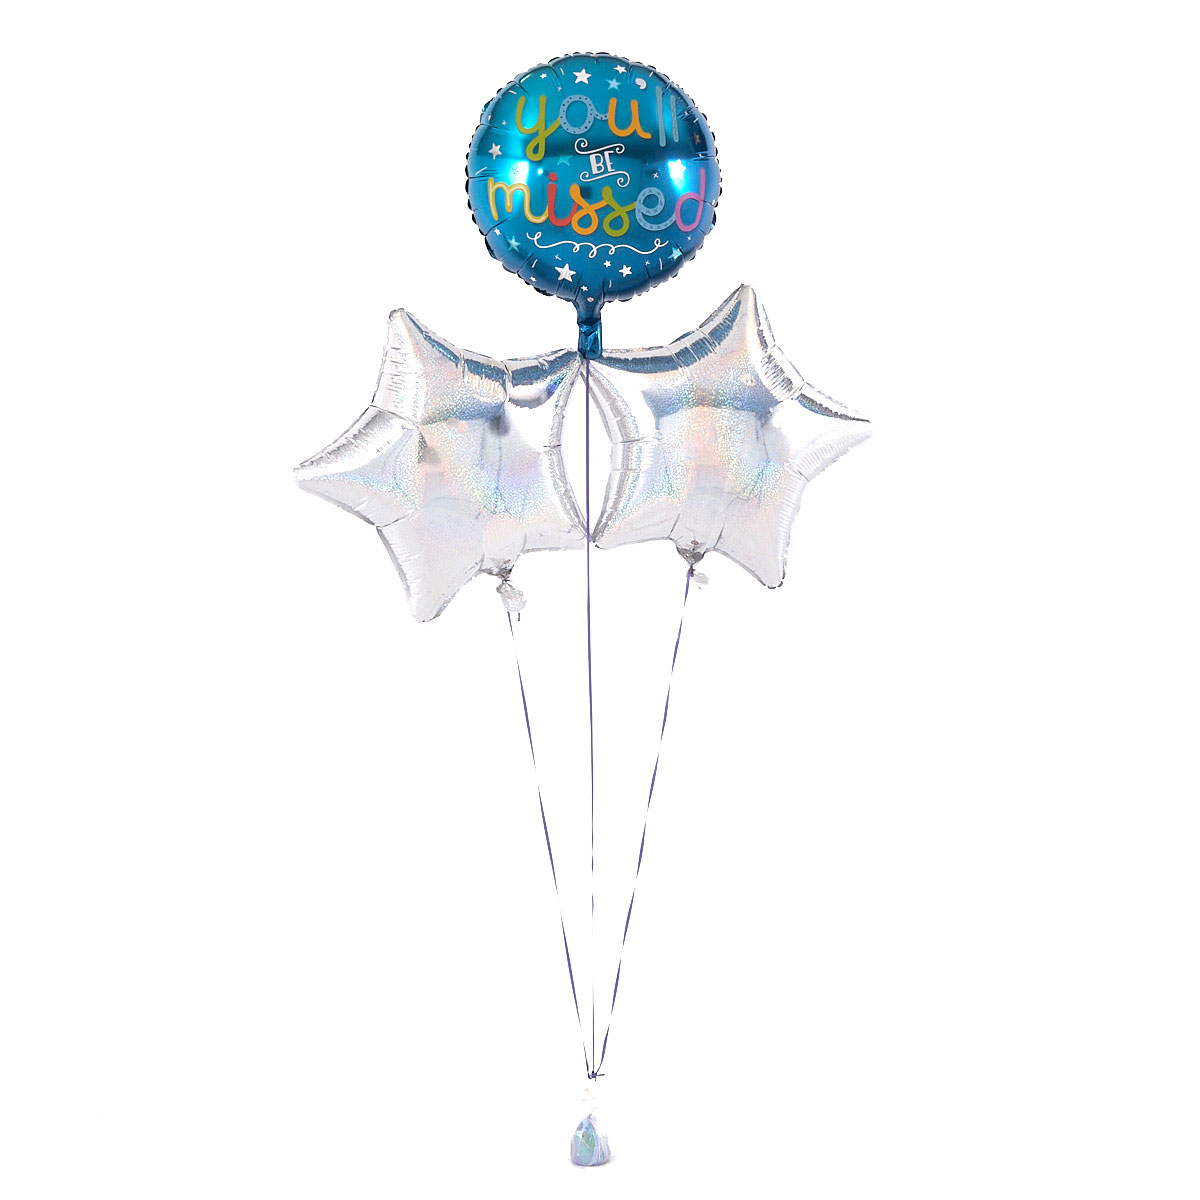 You'll Be Missed Blue & Silver Balloon Bouquet - DELIVERED INFLATED!